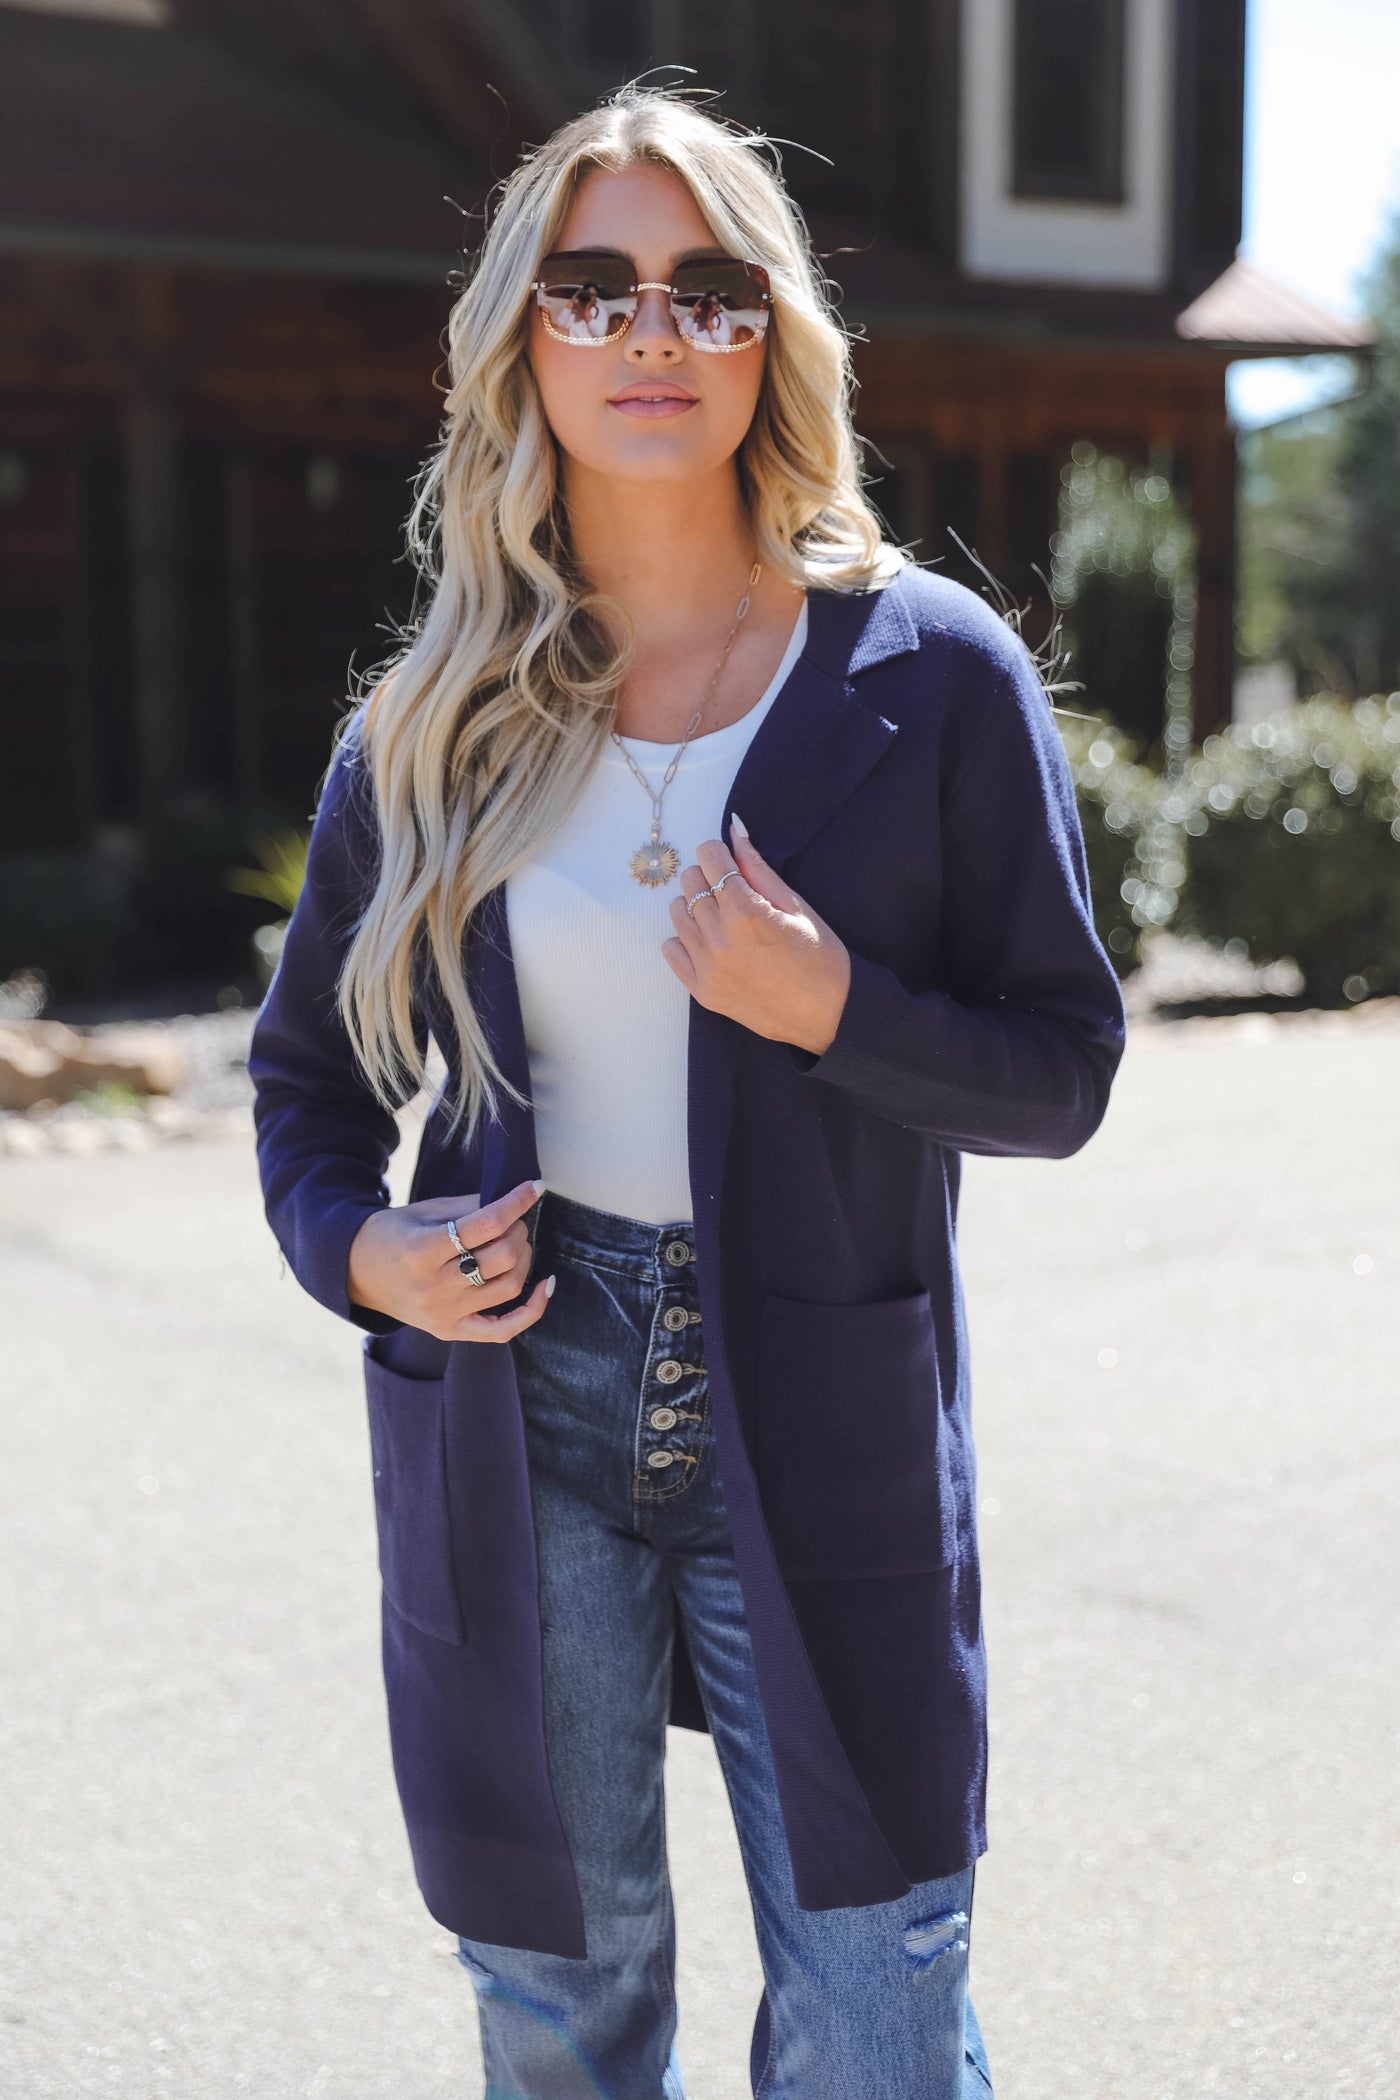 Women's Navy Cardigan with Front Pockets- Women's Classic Cardigan- Work Professional Navy Cardigan